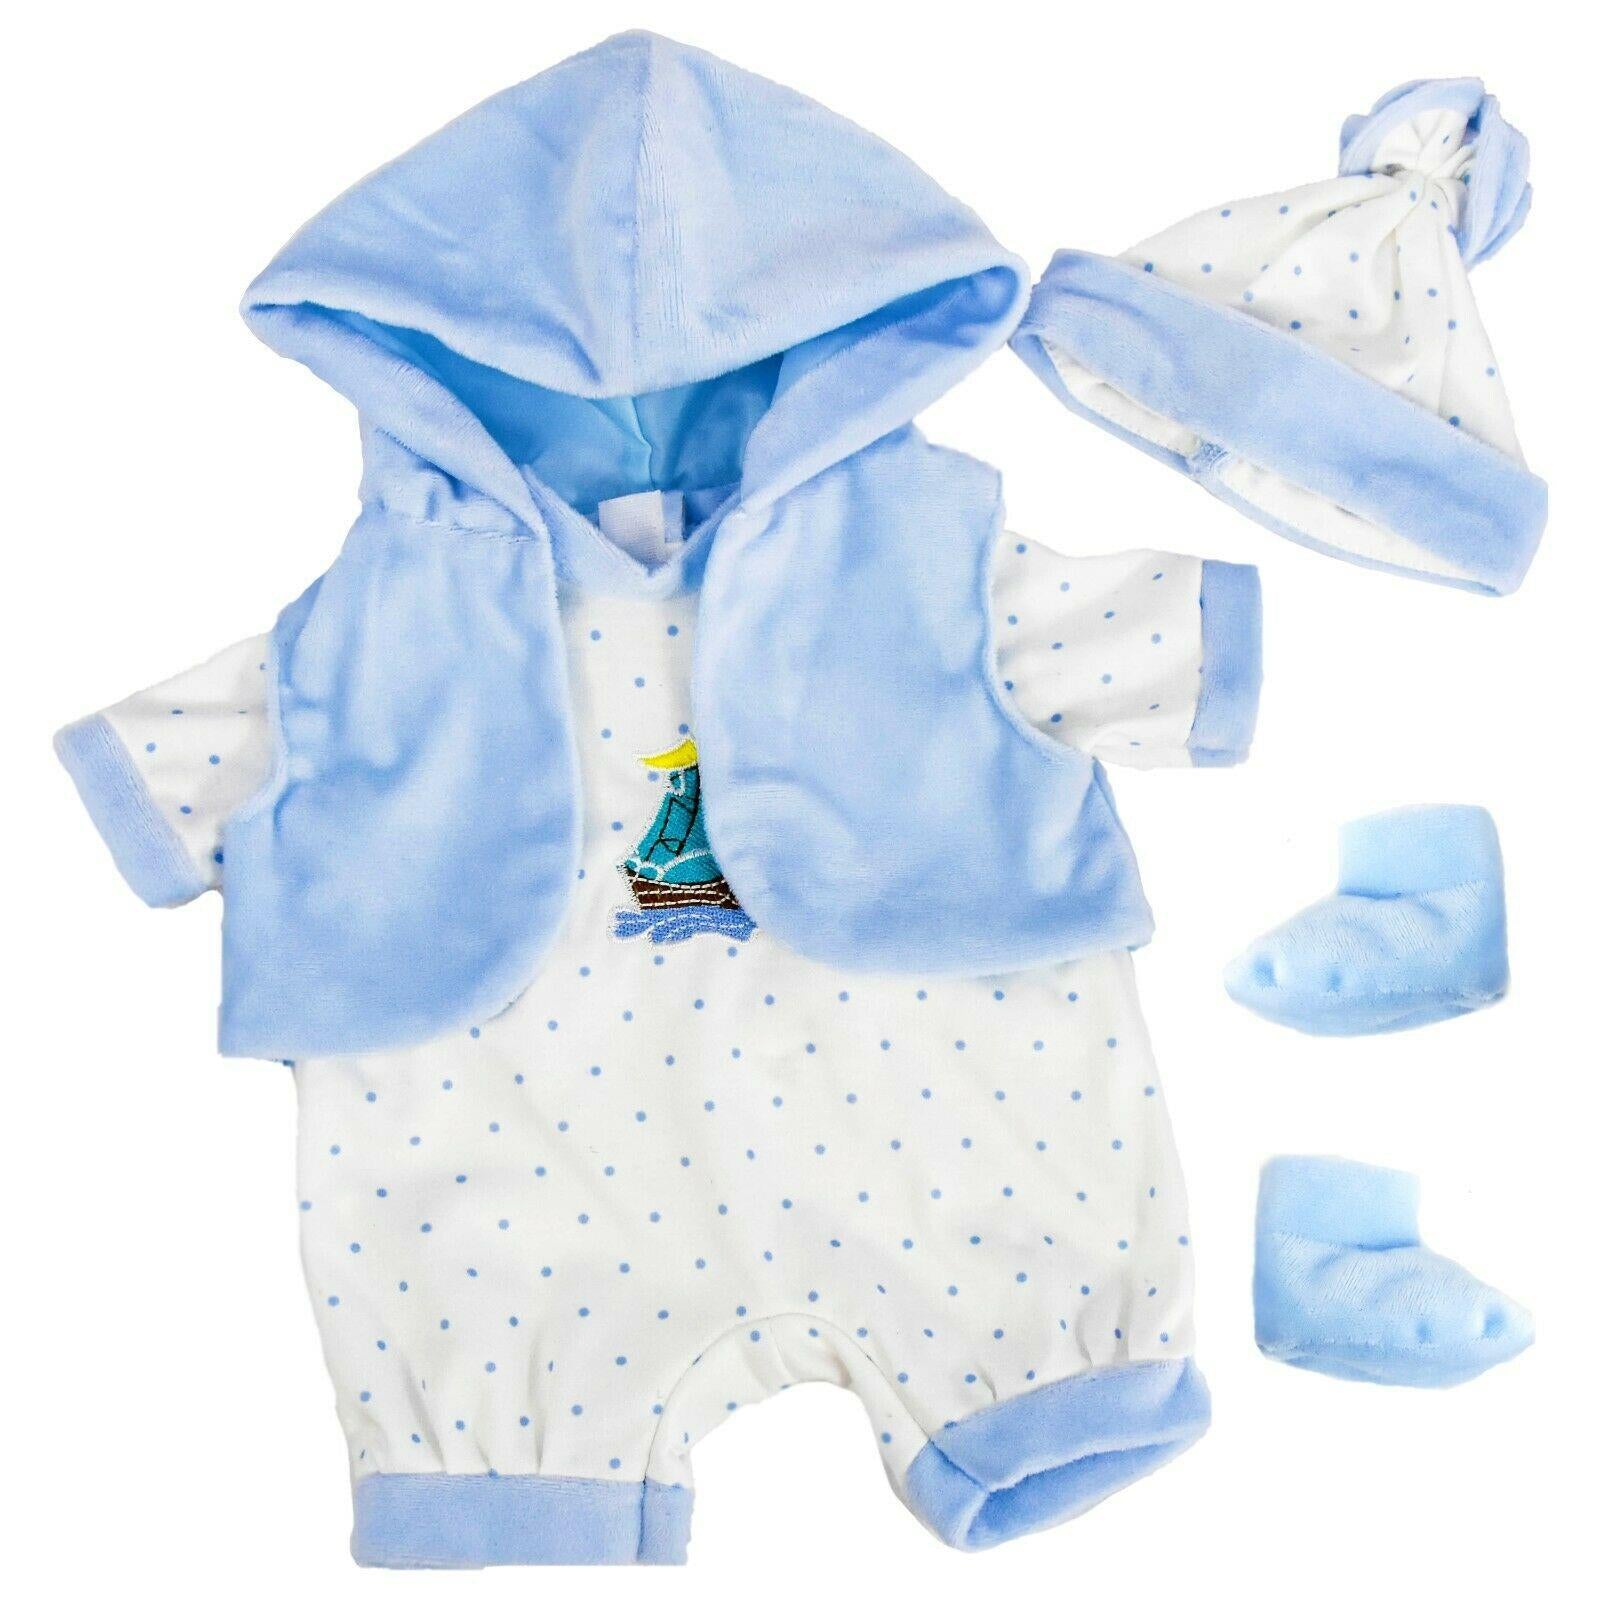 18" Baby Boy Doll Clothes Set Of Two by BiBi Doll - The Magic Toy Shop